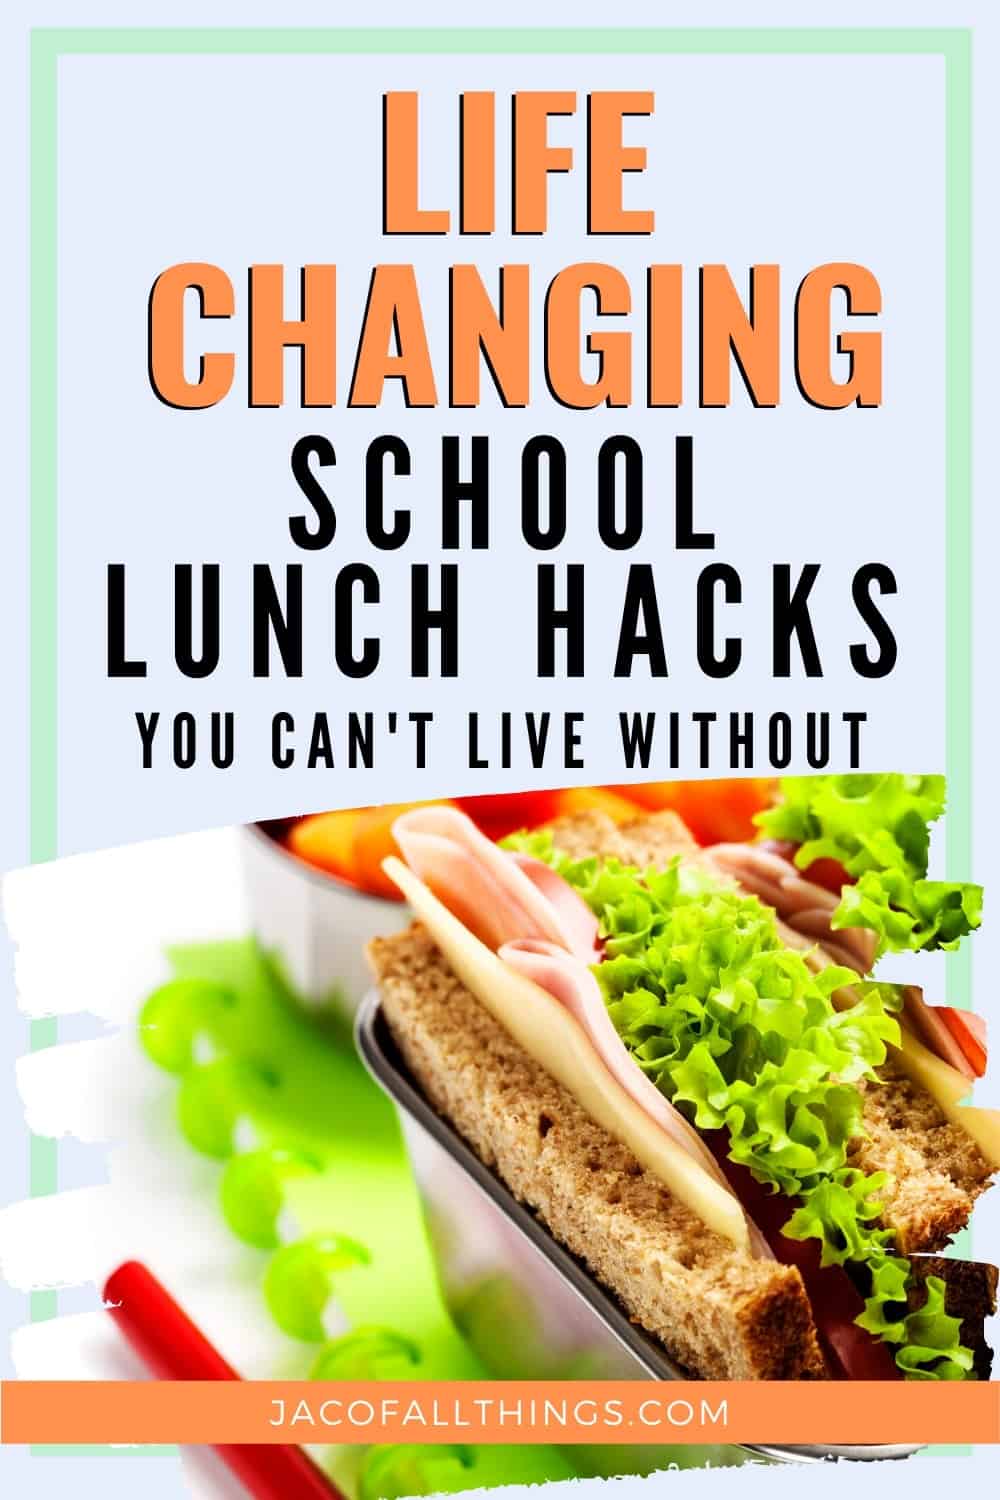 These school lunch hacks and tips will save you so much time and make packing lunch for your kids much easier. A must read for every parent who wants to get time back in their day. #schoollunch #lunchtips